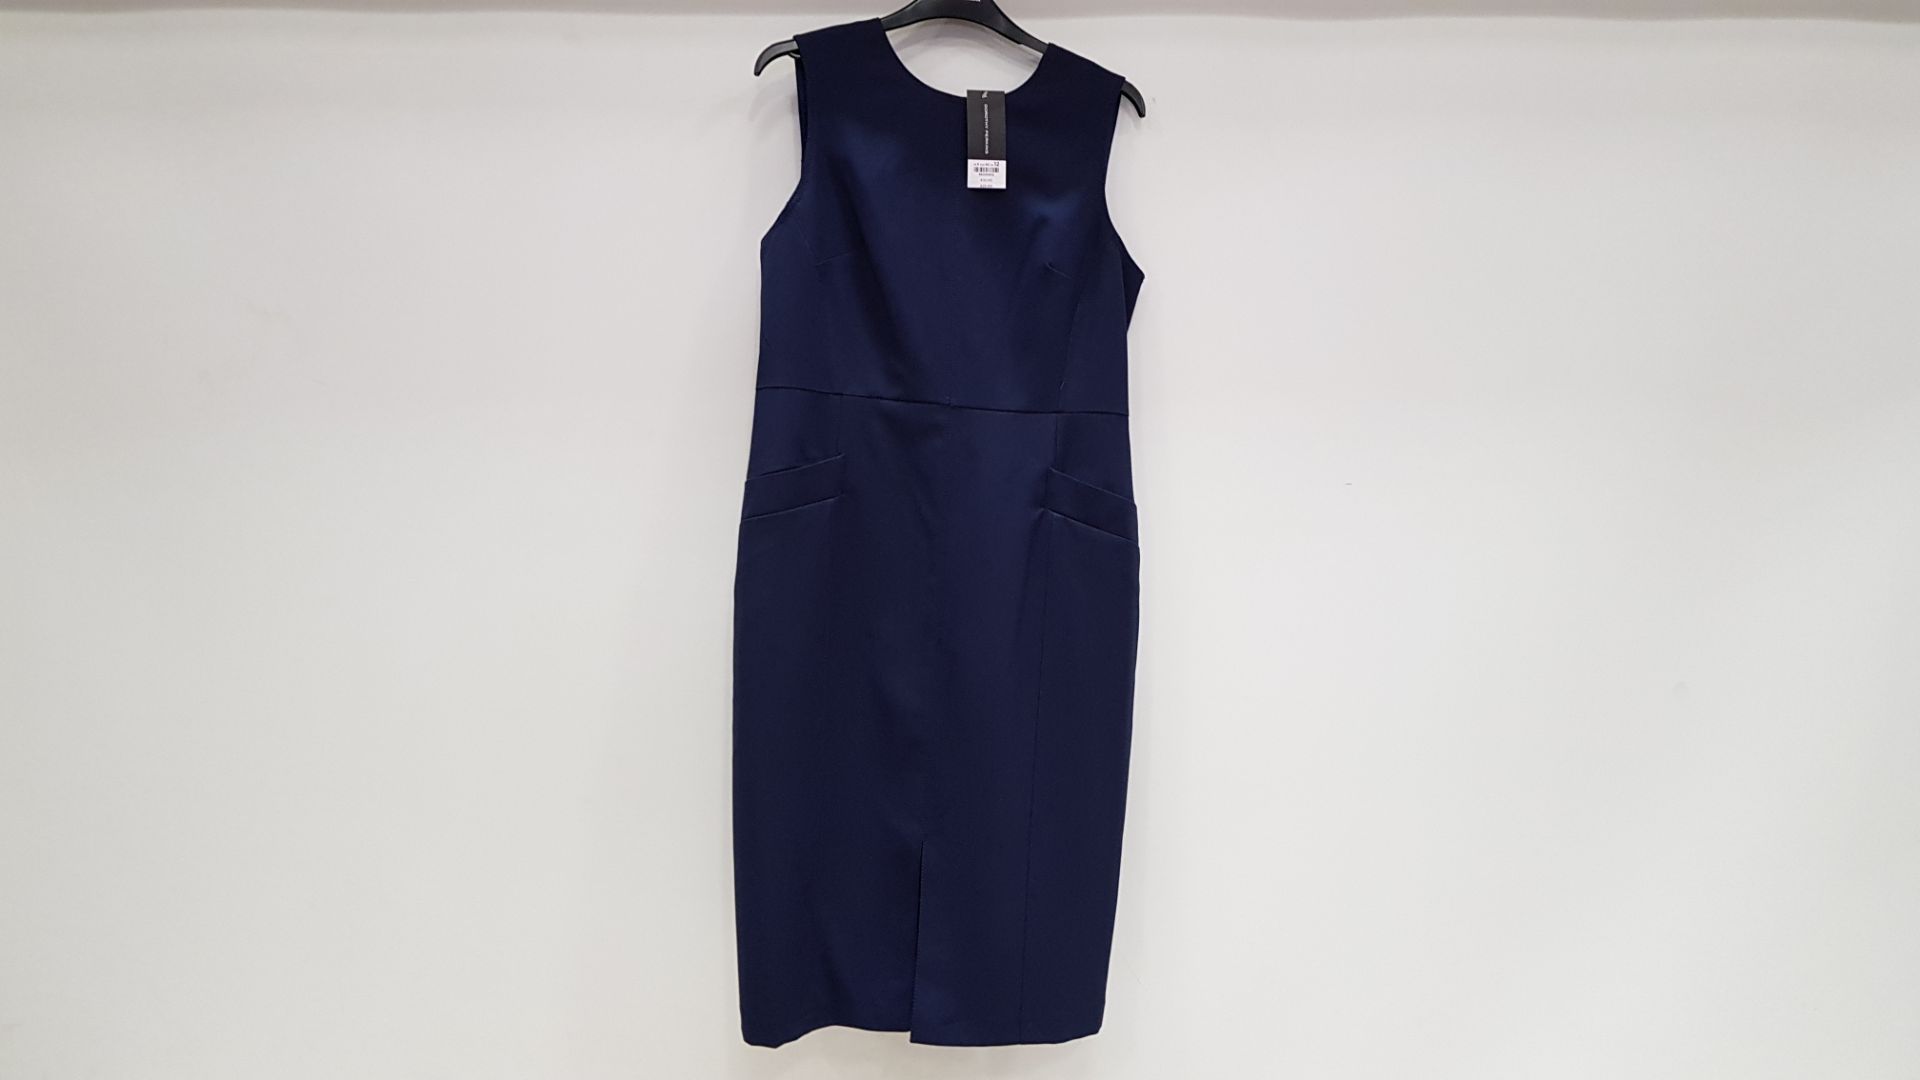 25 X BRAND NEW DOROTHY PERKINS NAVY OPEN BACK ZIP UP DRESSES IN SIZES 6, 8, 10, 12 AND 14 RRP £25 (